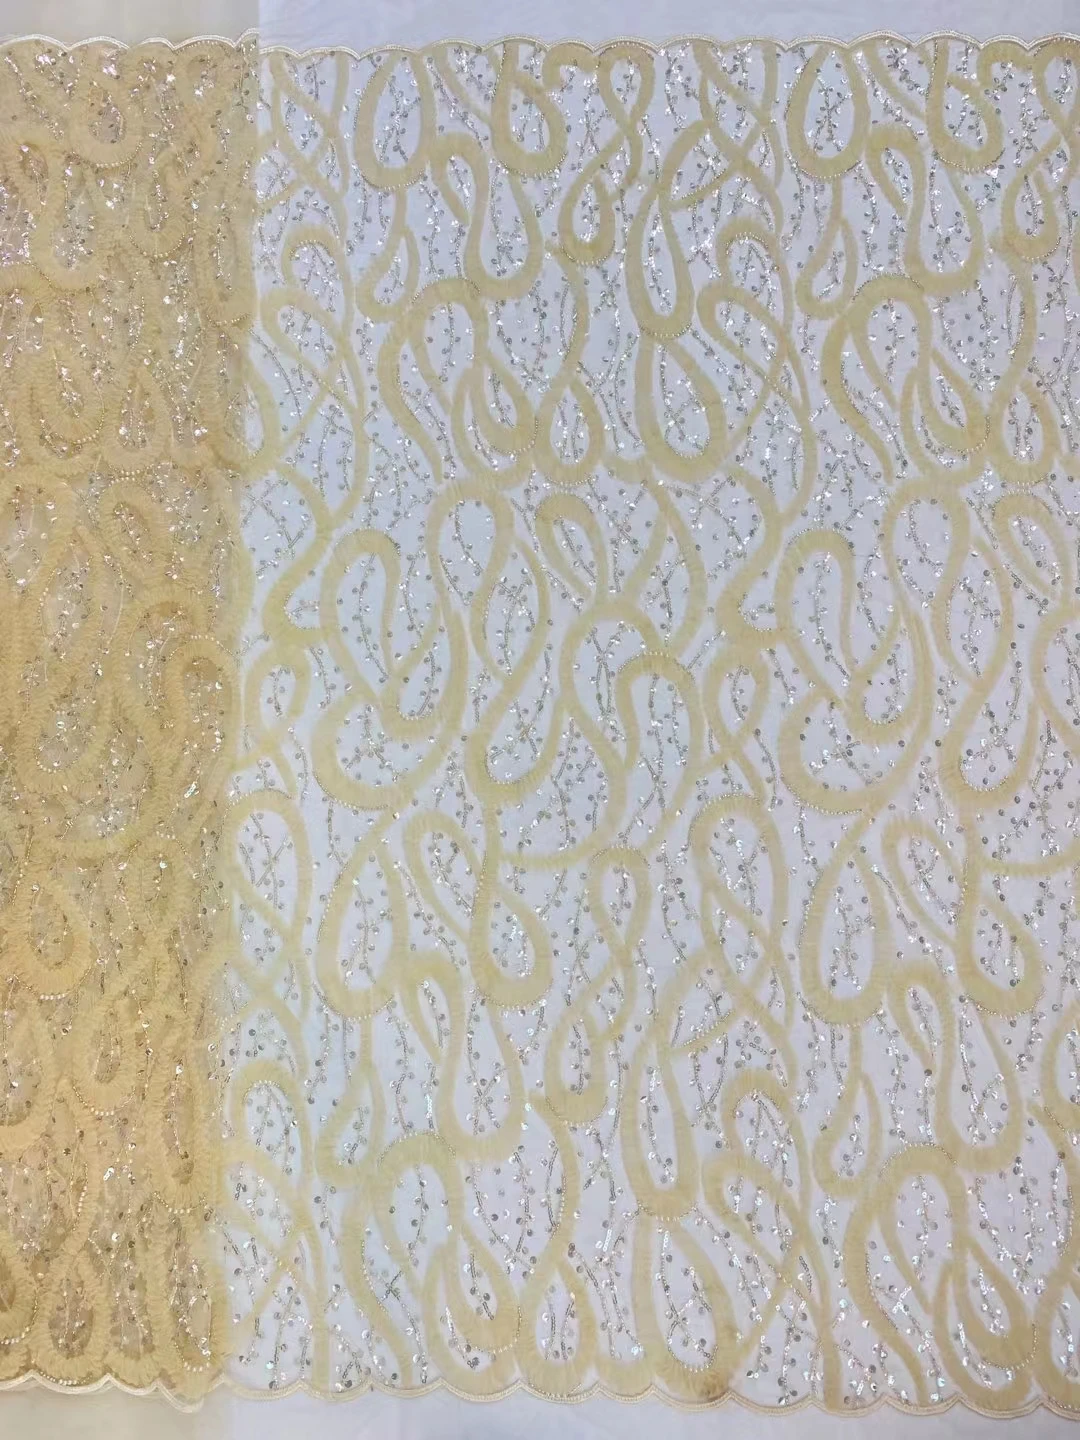 

High Quality Embroidered Lace Fabric JRB-27.62701 with Sequins for Lady or Young Gril Dress Nigerian French Net Lace